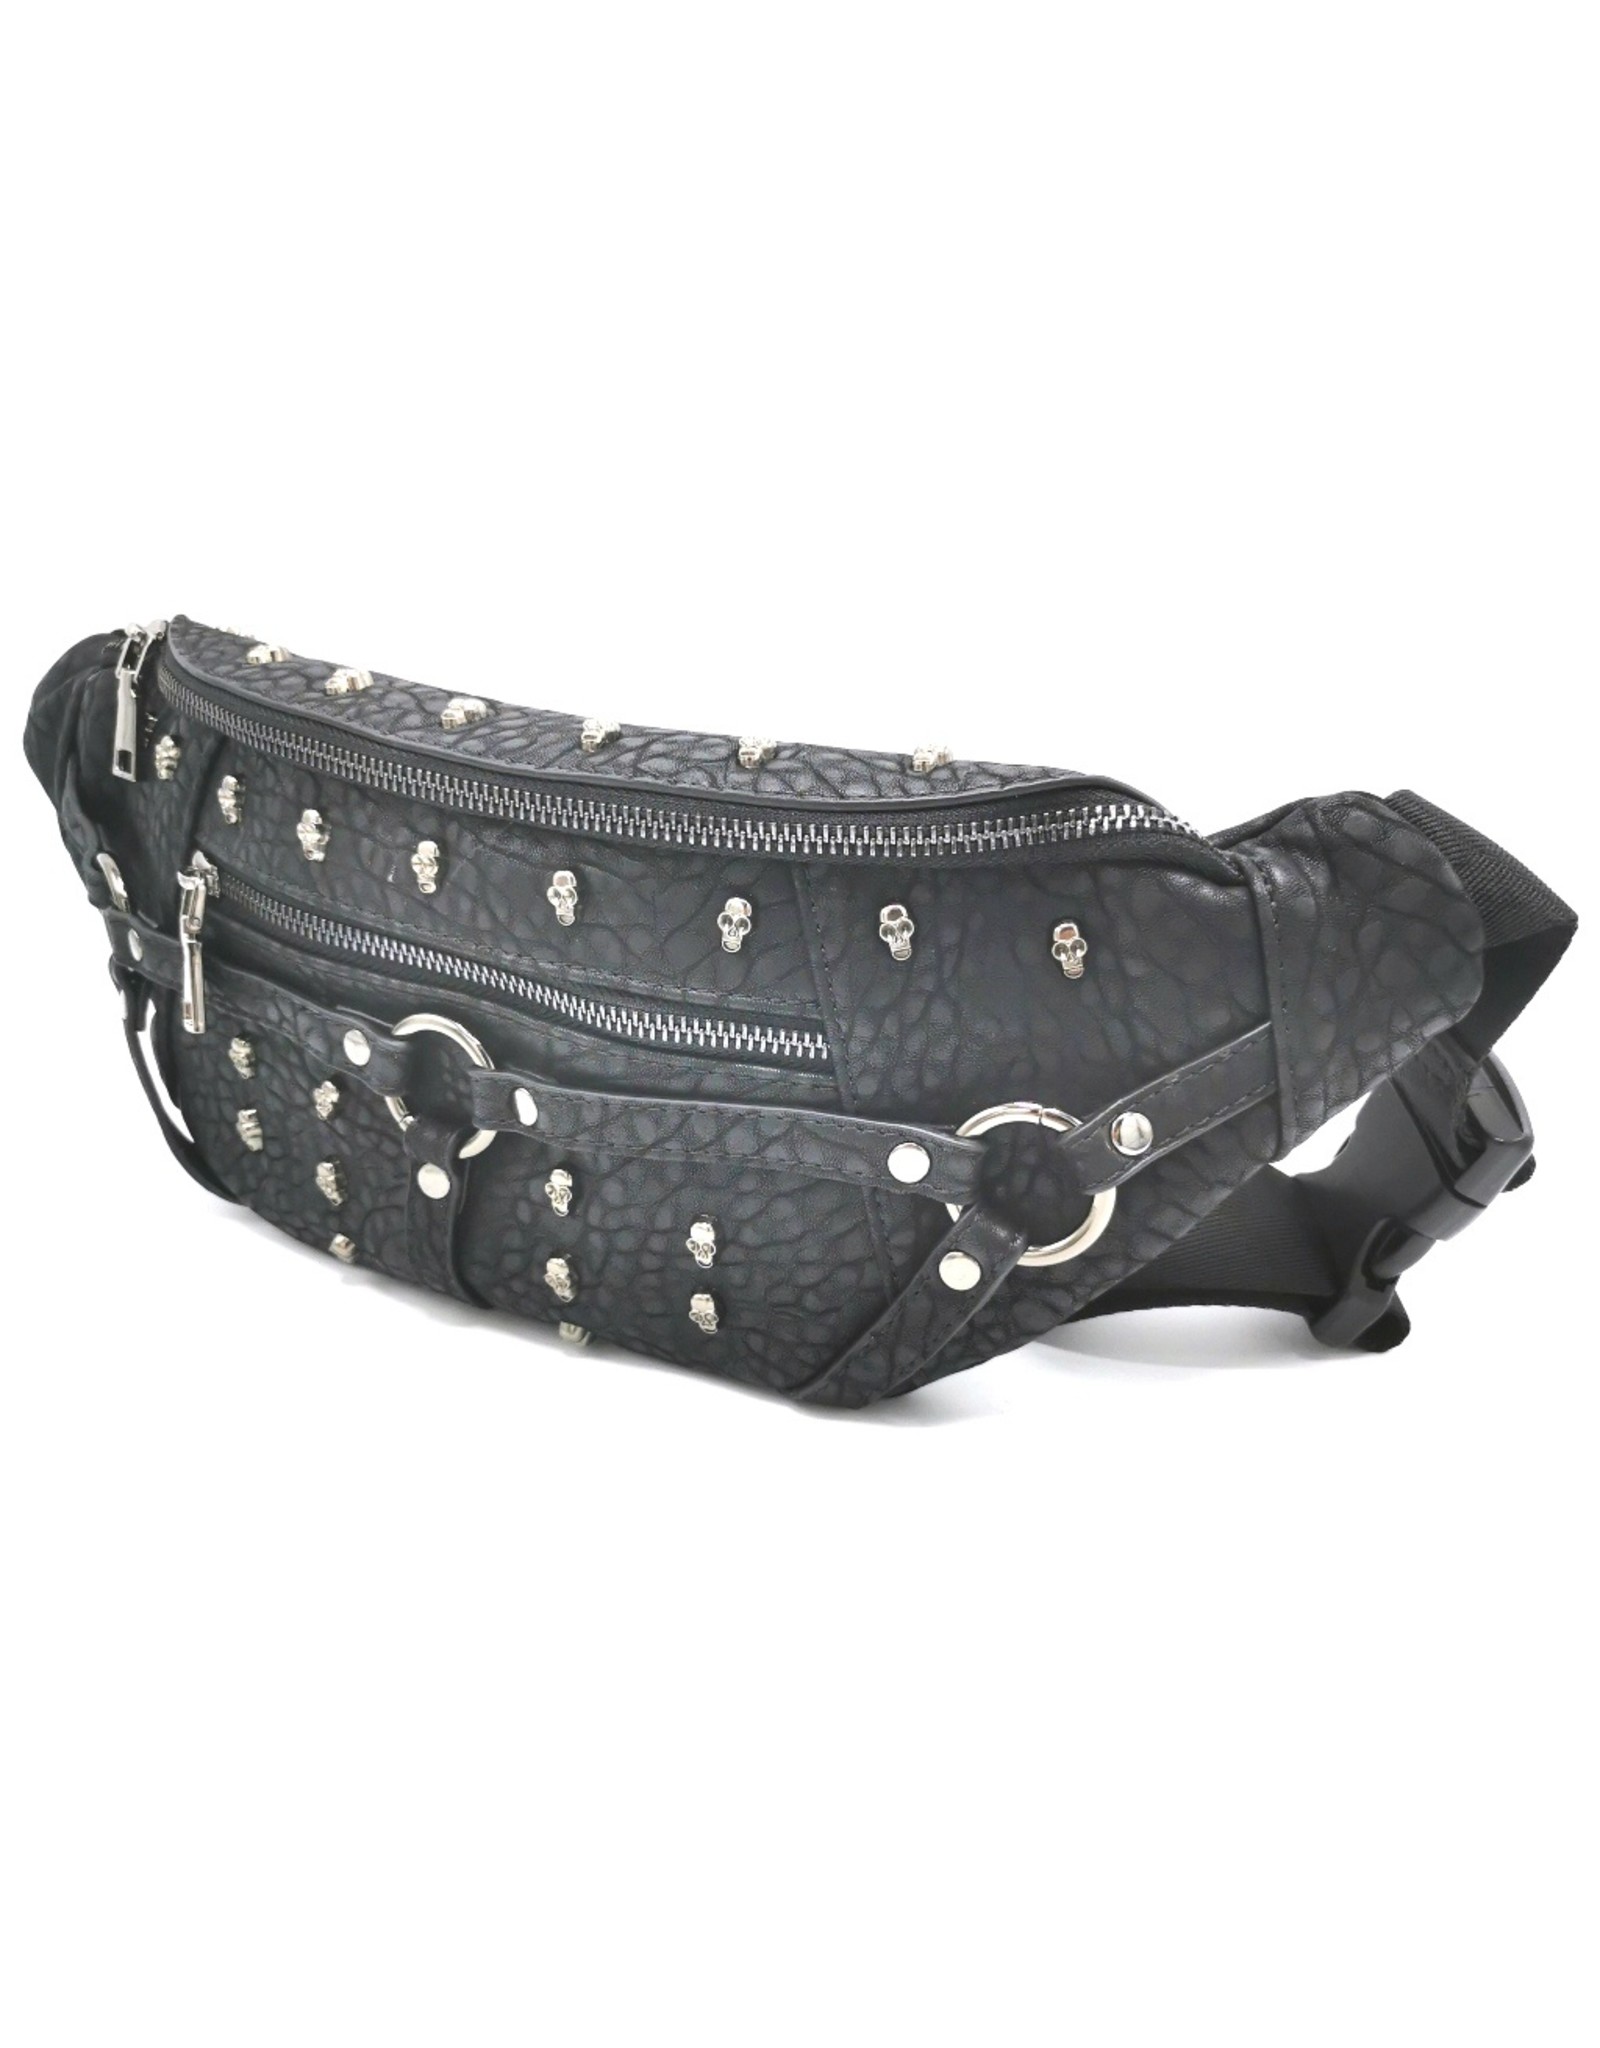 Dark Desire Gothic bags Steampunk bags - Gothic waist bag with small metal skulls